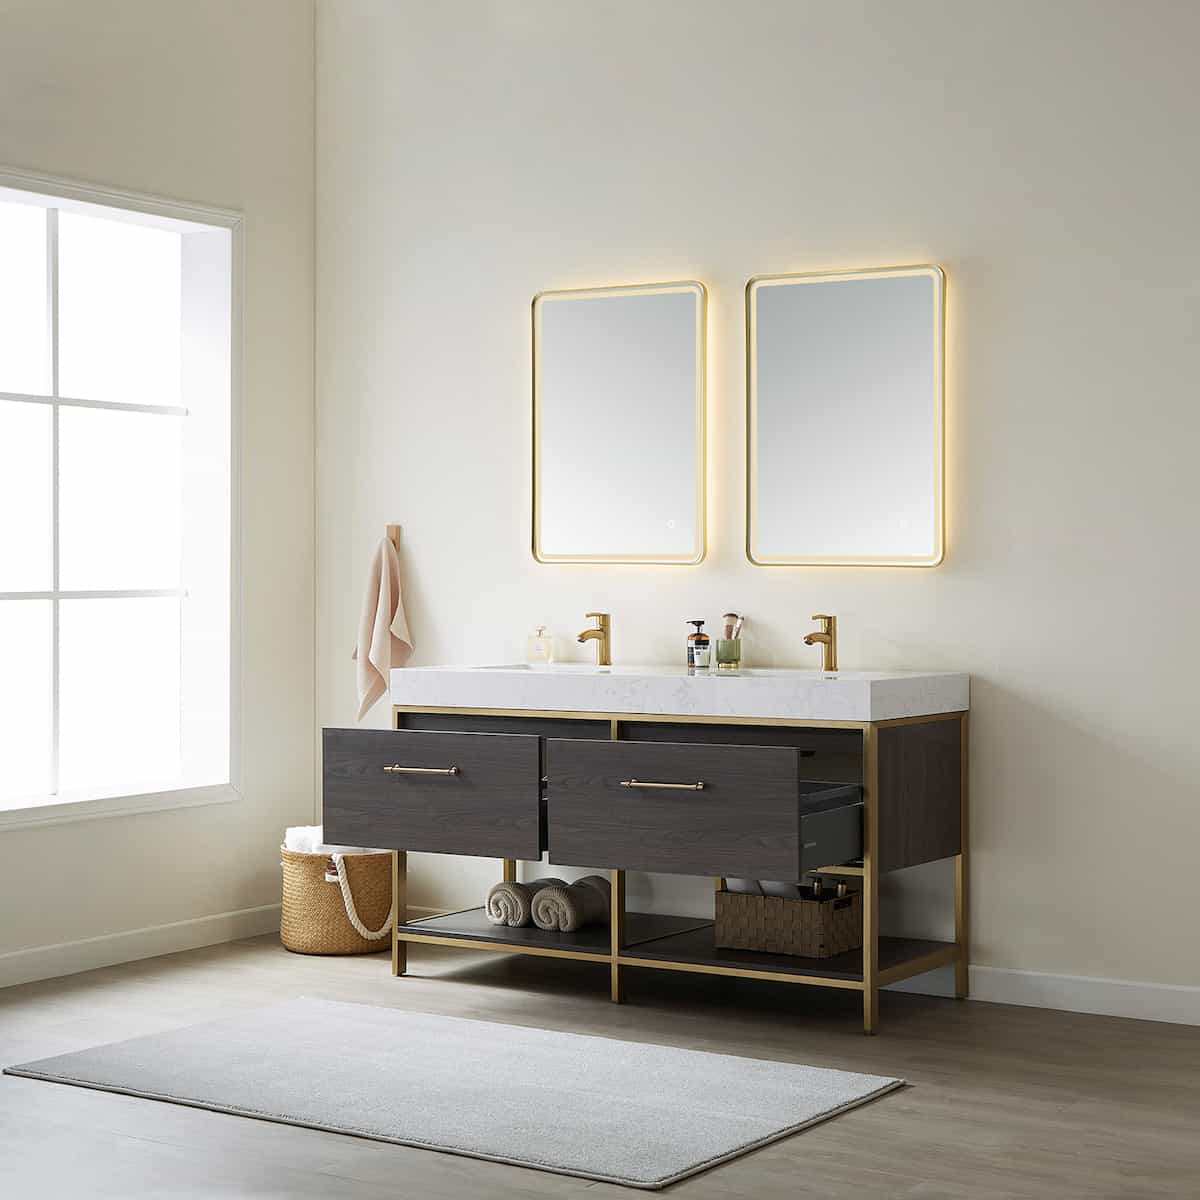 Vinnova Palma 60 Inch Freestanding Double Sink Bath Vanity in Suleiman Oak with White Composite Grain Stone With Mirror Drawers 701260G-SO-GW